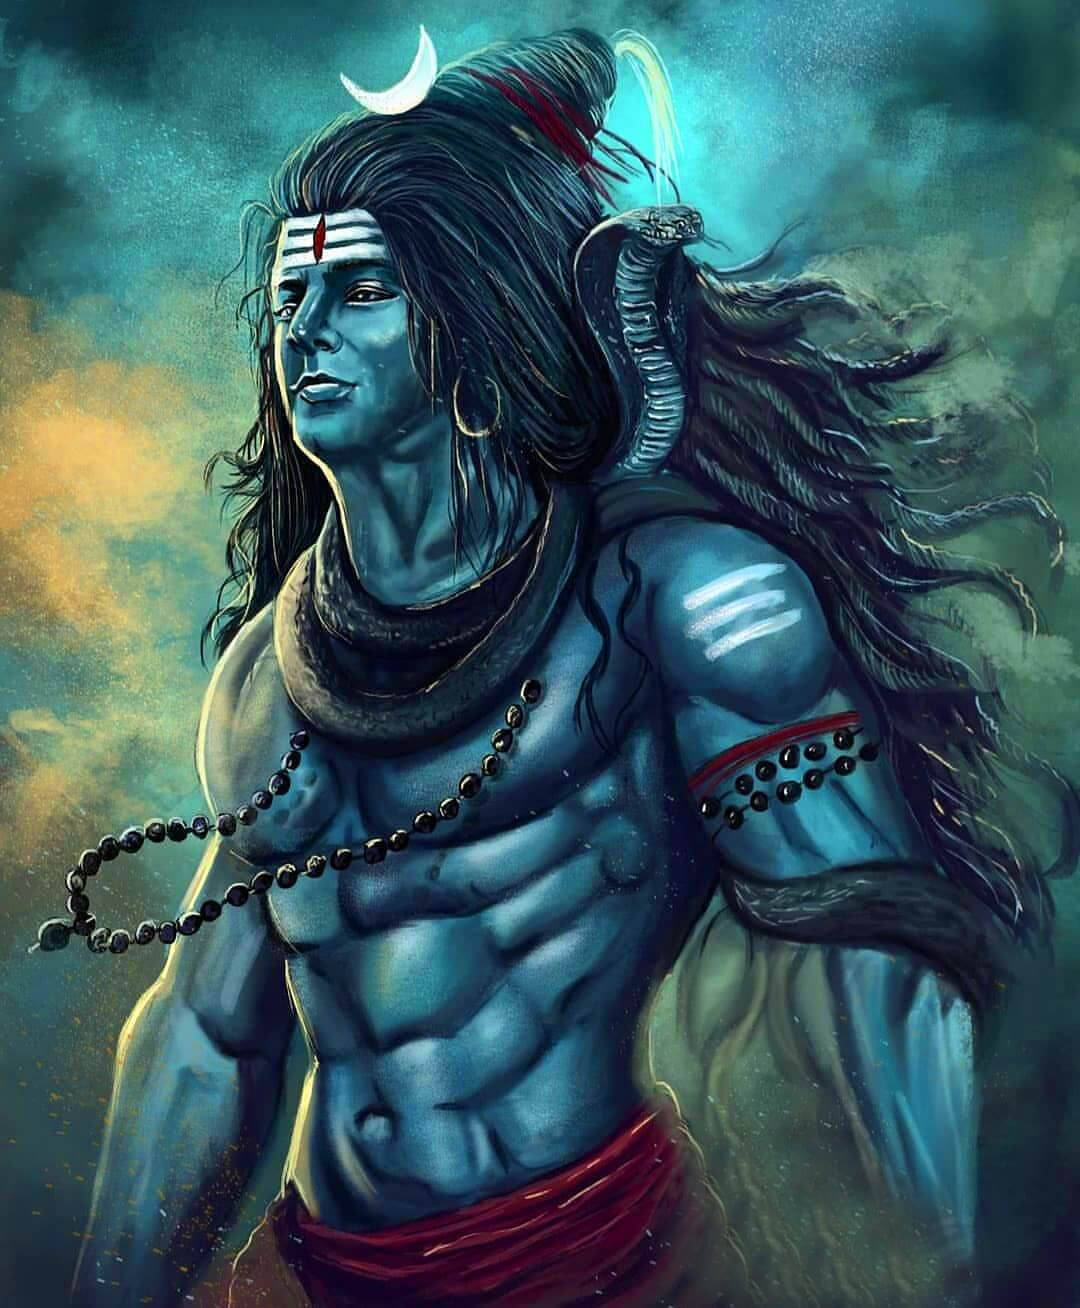 Incredible Compilation of Over 999+ Top-Quality HD Mahadev Images in Full 4K Resolution